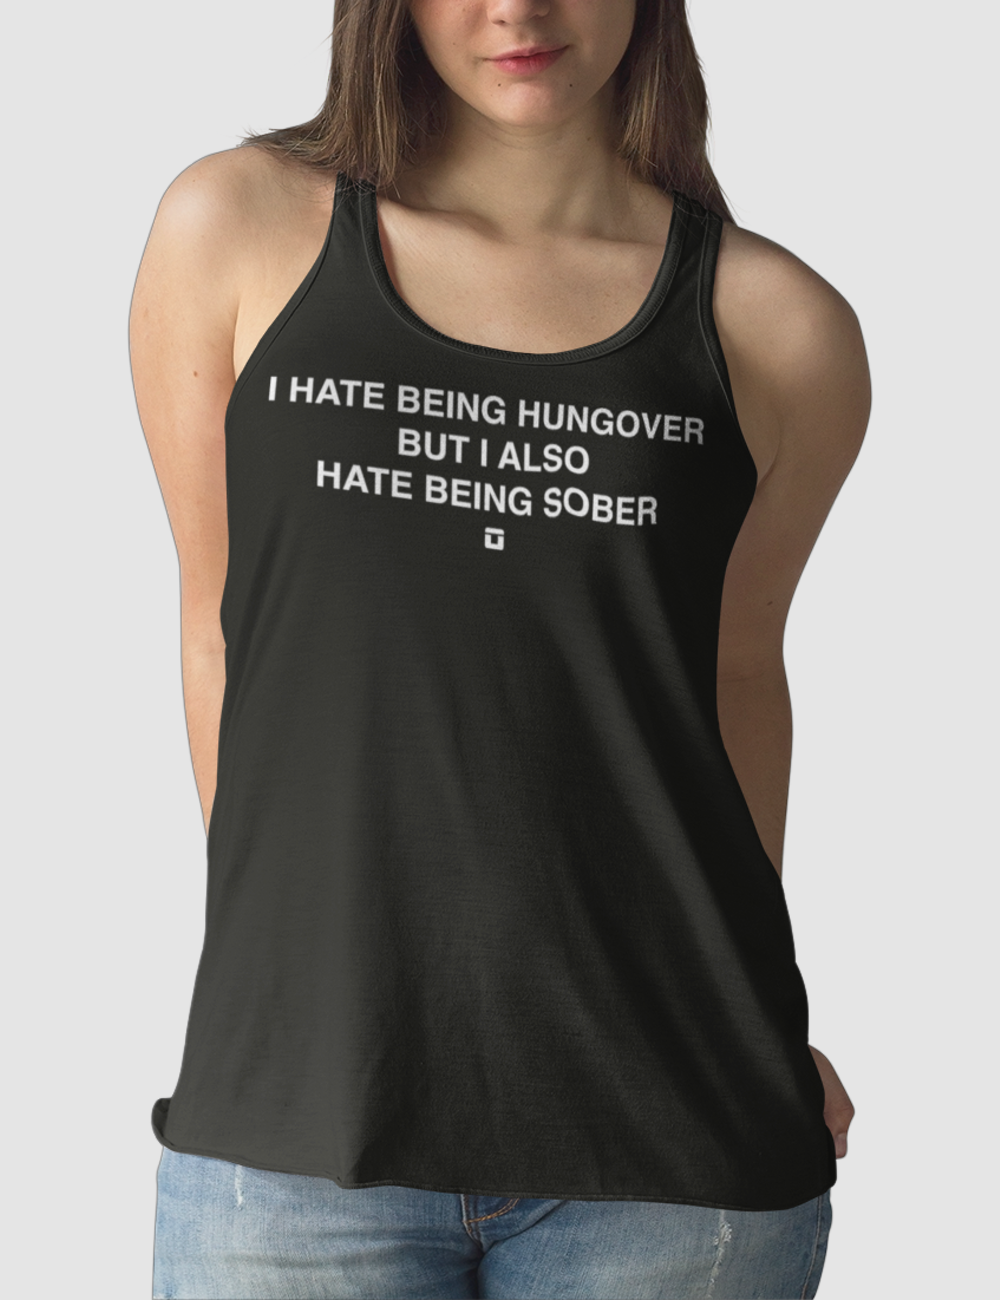 I Hate Being Hungover But I Also Hate Being Sober Women's Cut Racerback Tank Top OniTakai